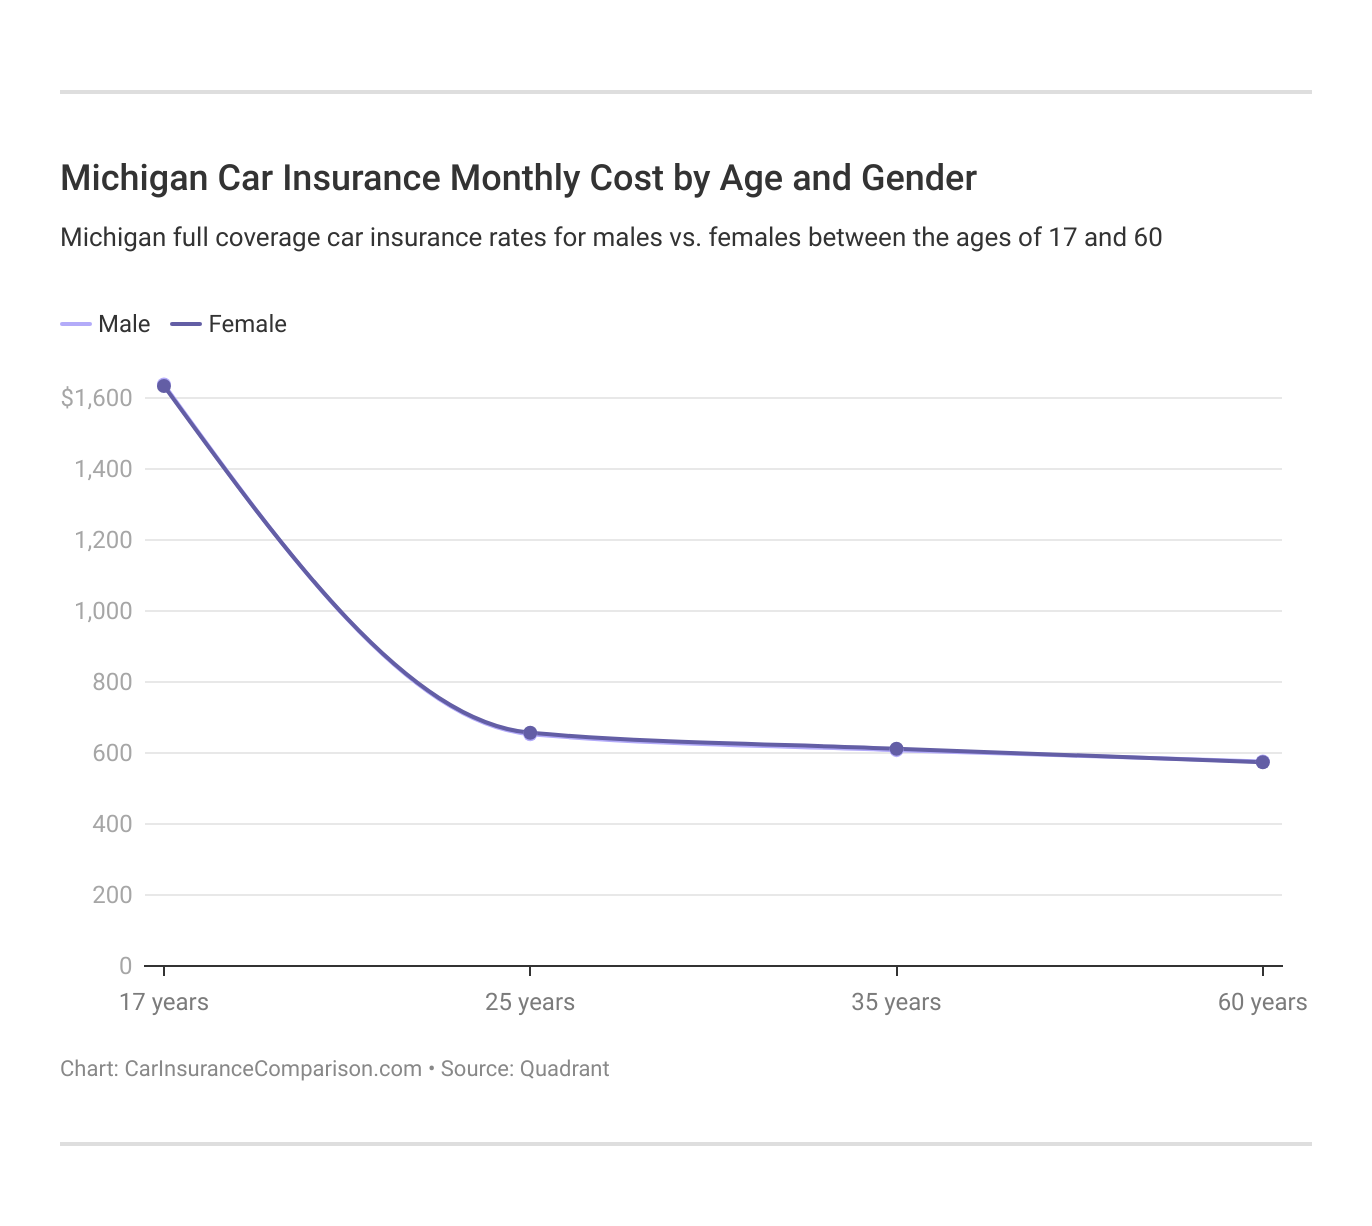 <h3>Michigan Car Insurance Monthly Cost by Age and Gender</h3>